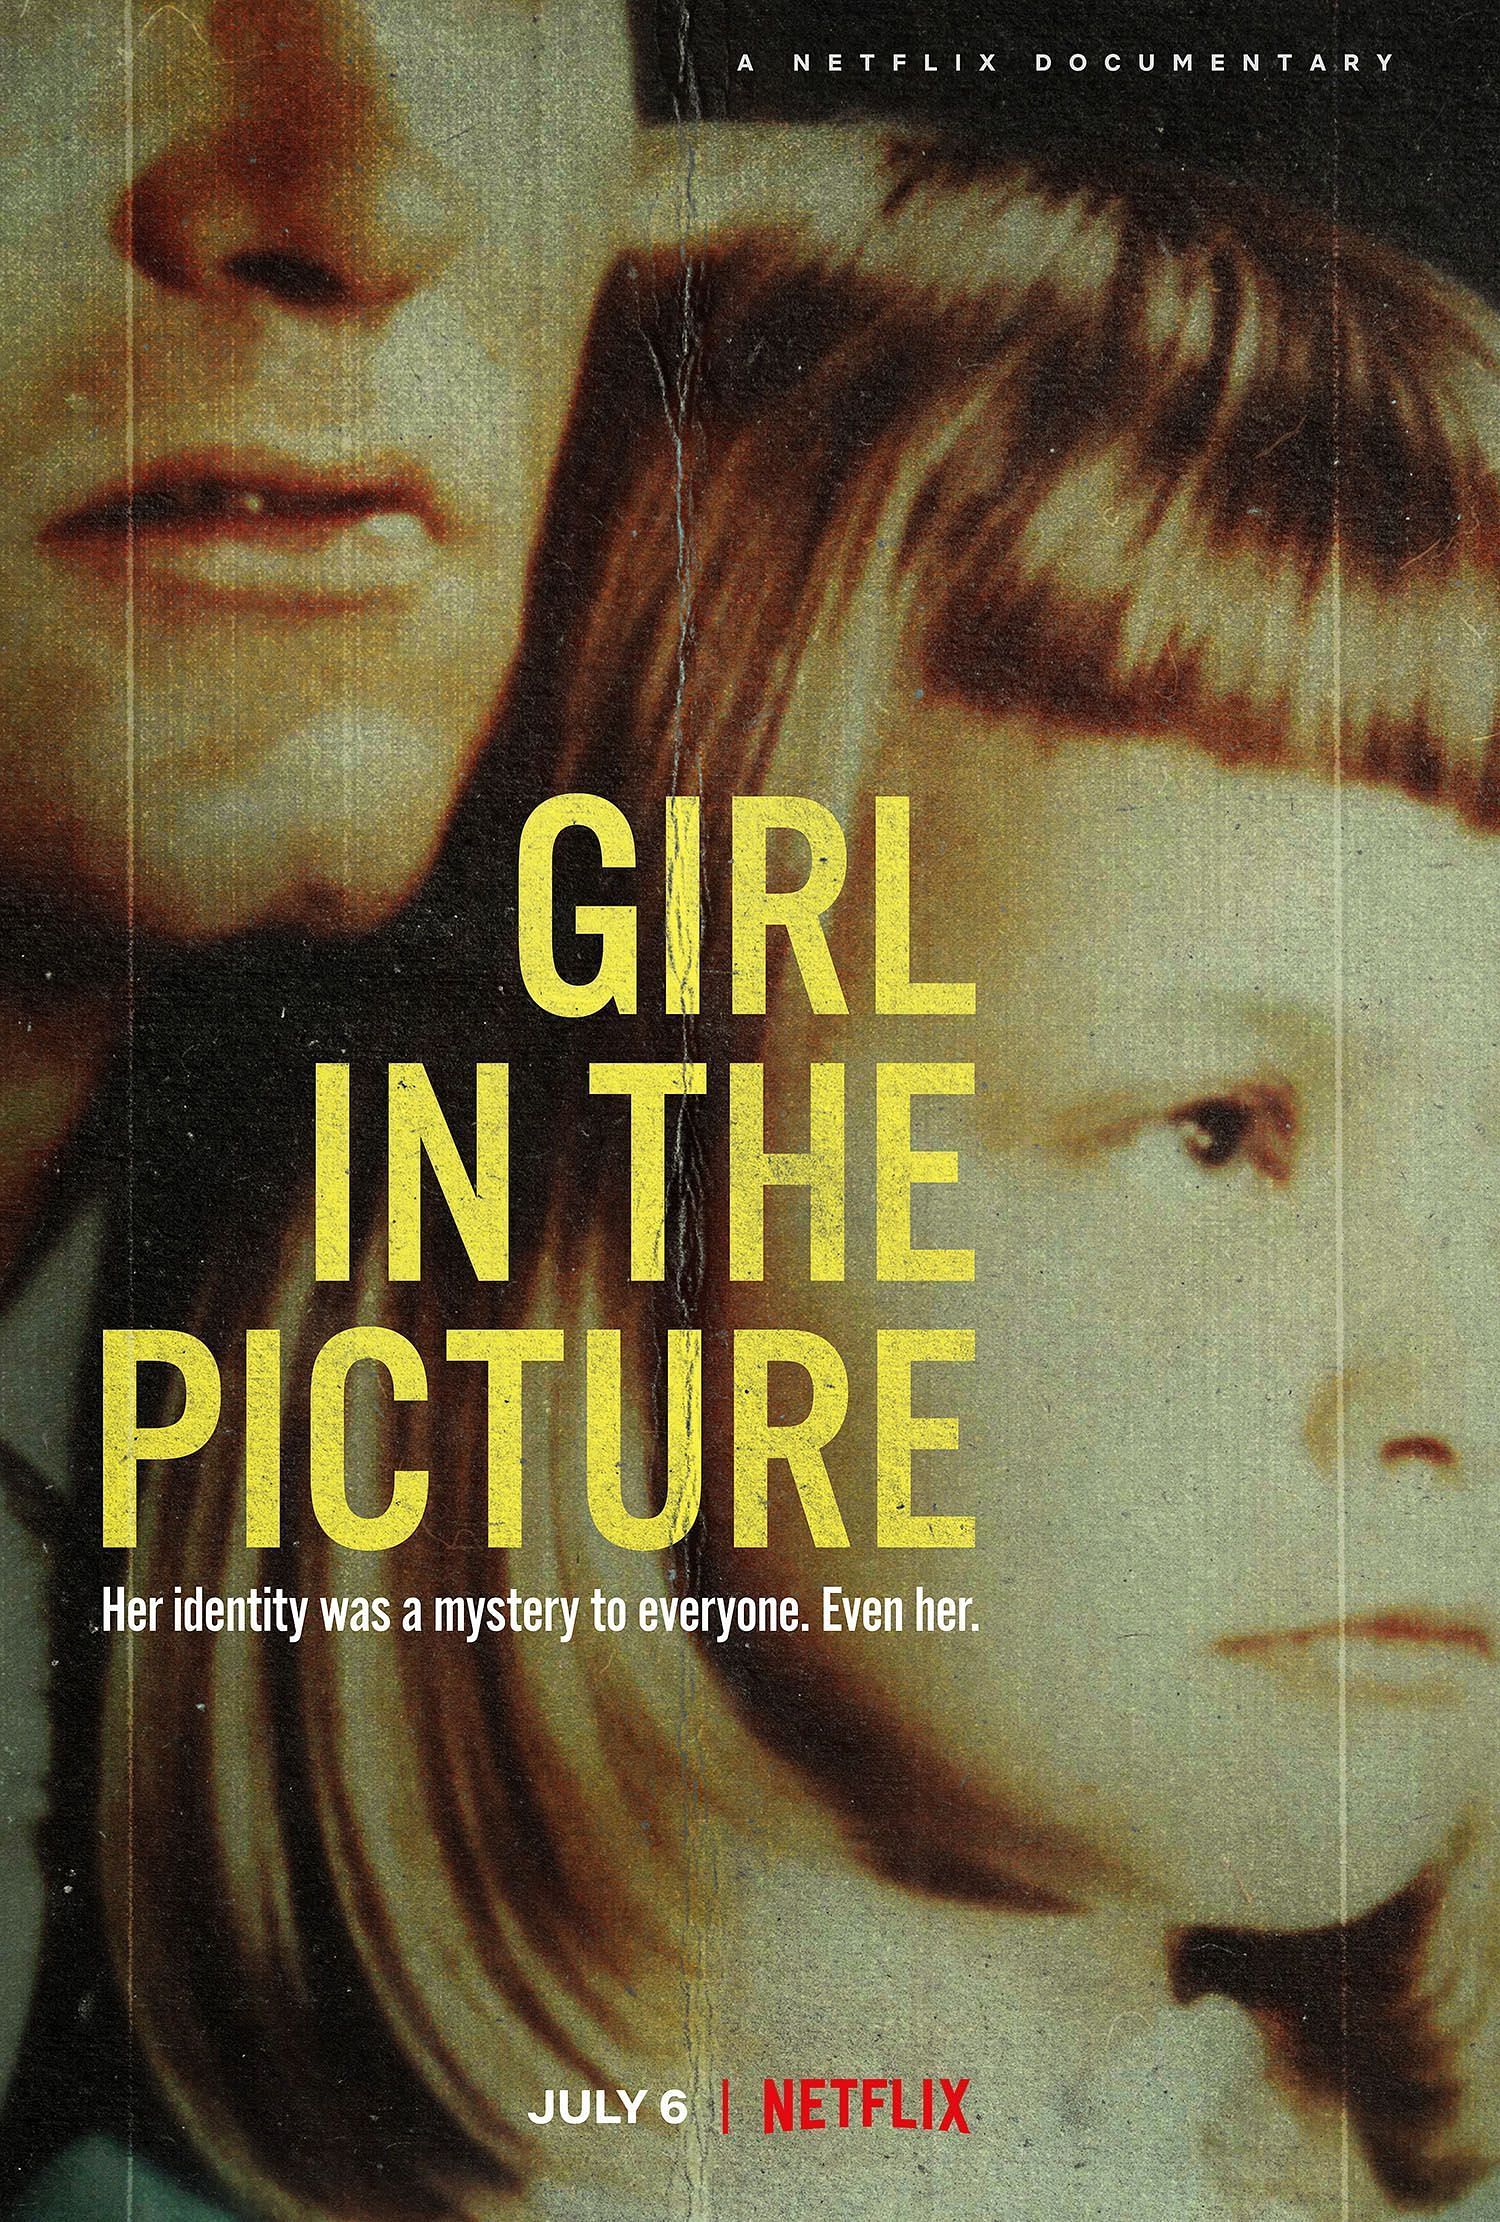 Girl in the Picture (Image via Netflix)